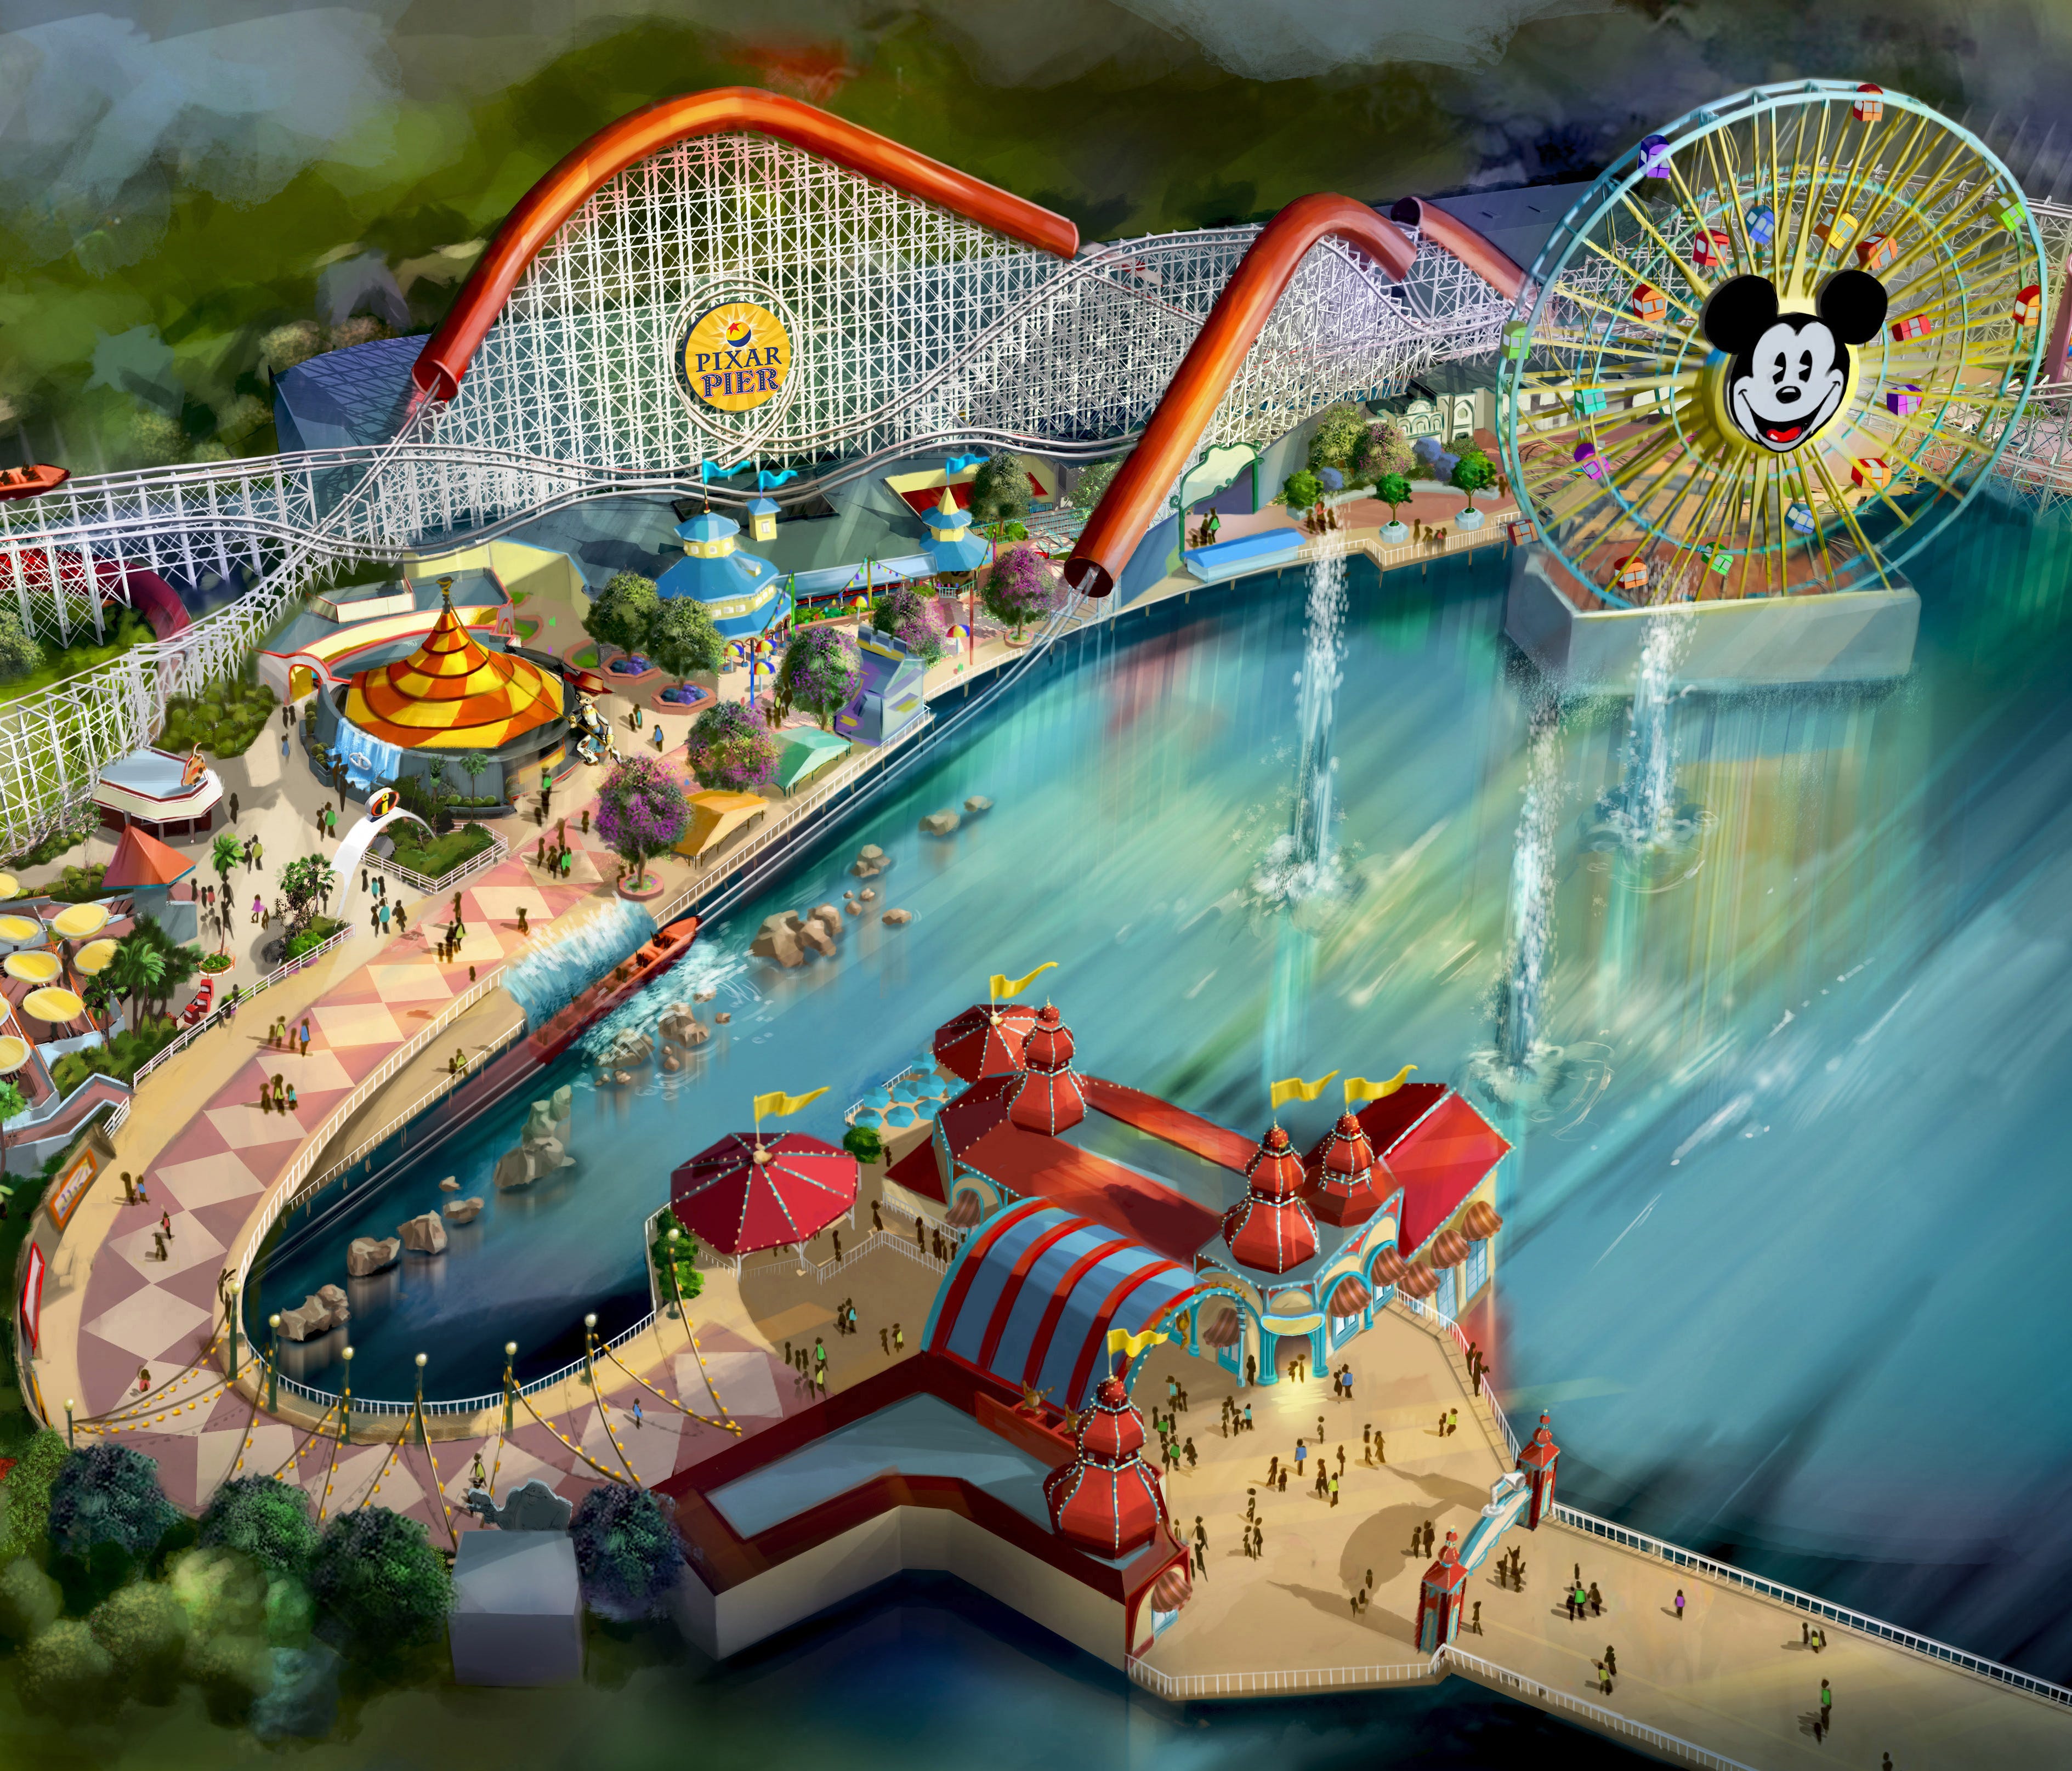 Summer 2018 will bring a transformed land when Pixar Pier opens for guests to experience at Disney California Adventure park, featuring the new Incredicoaster inspired by Disney•Pixar's 